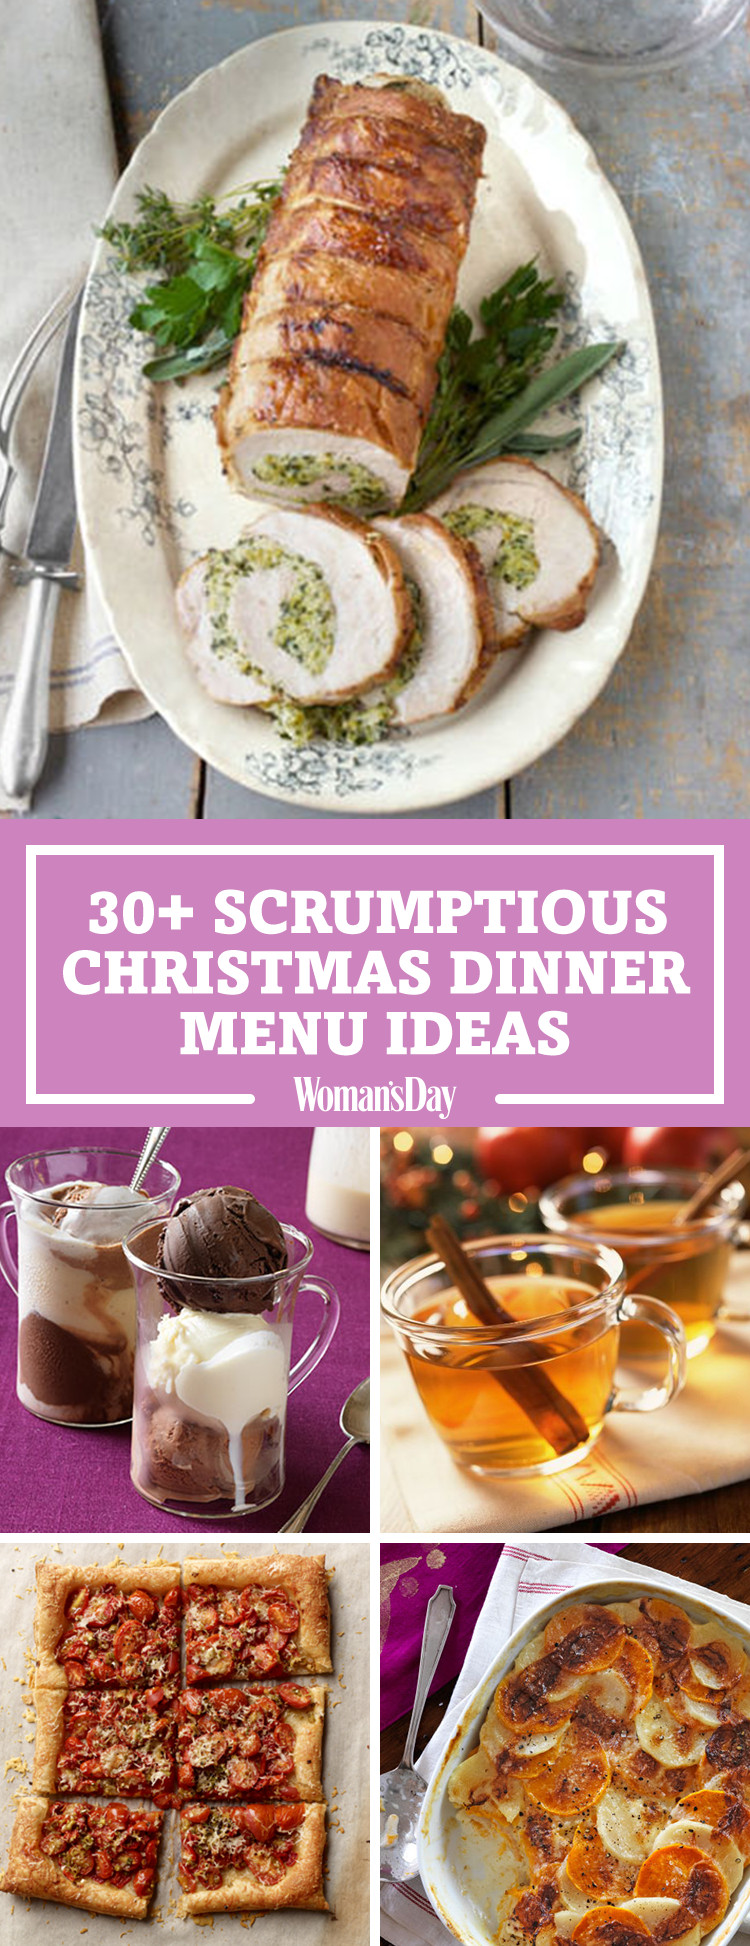 Christmas Dinner In A Can
 Best Christmas Dinner Menu Ideas for 2017